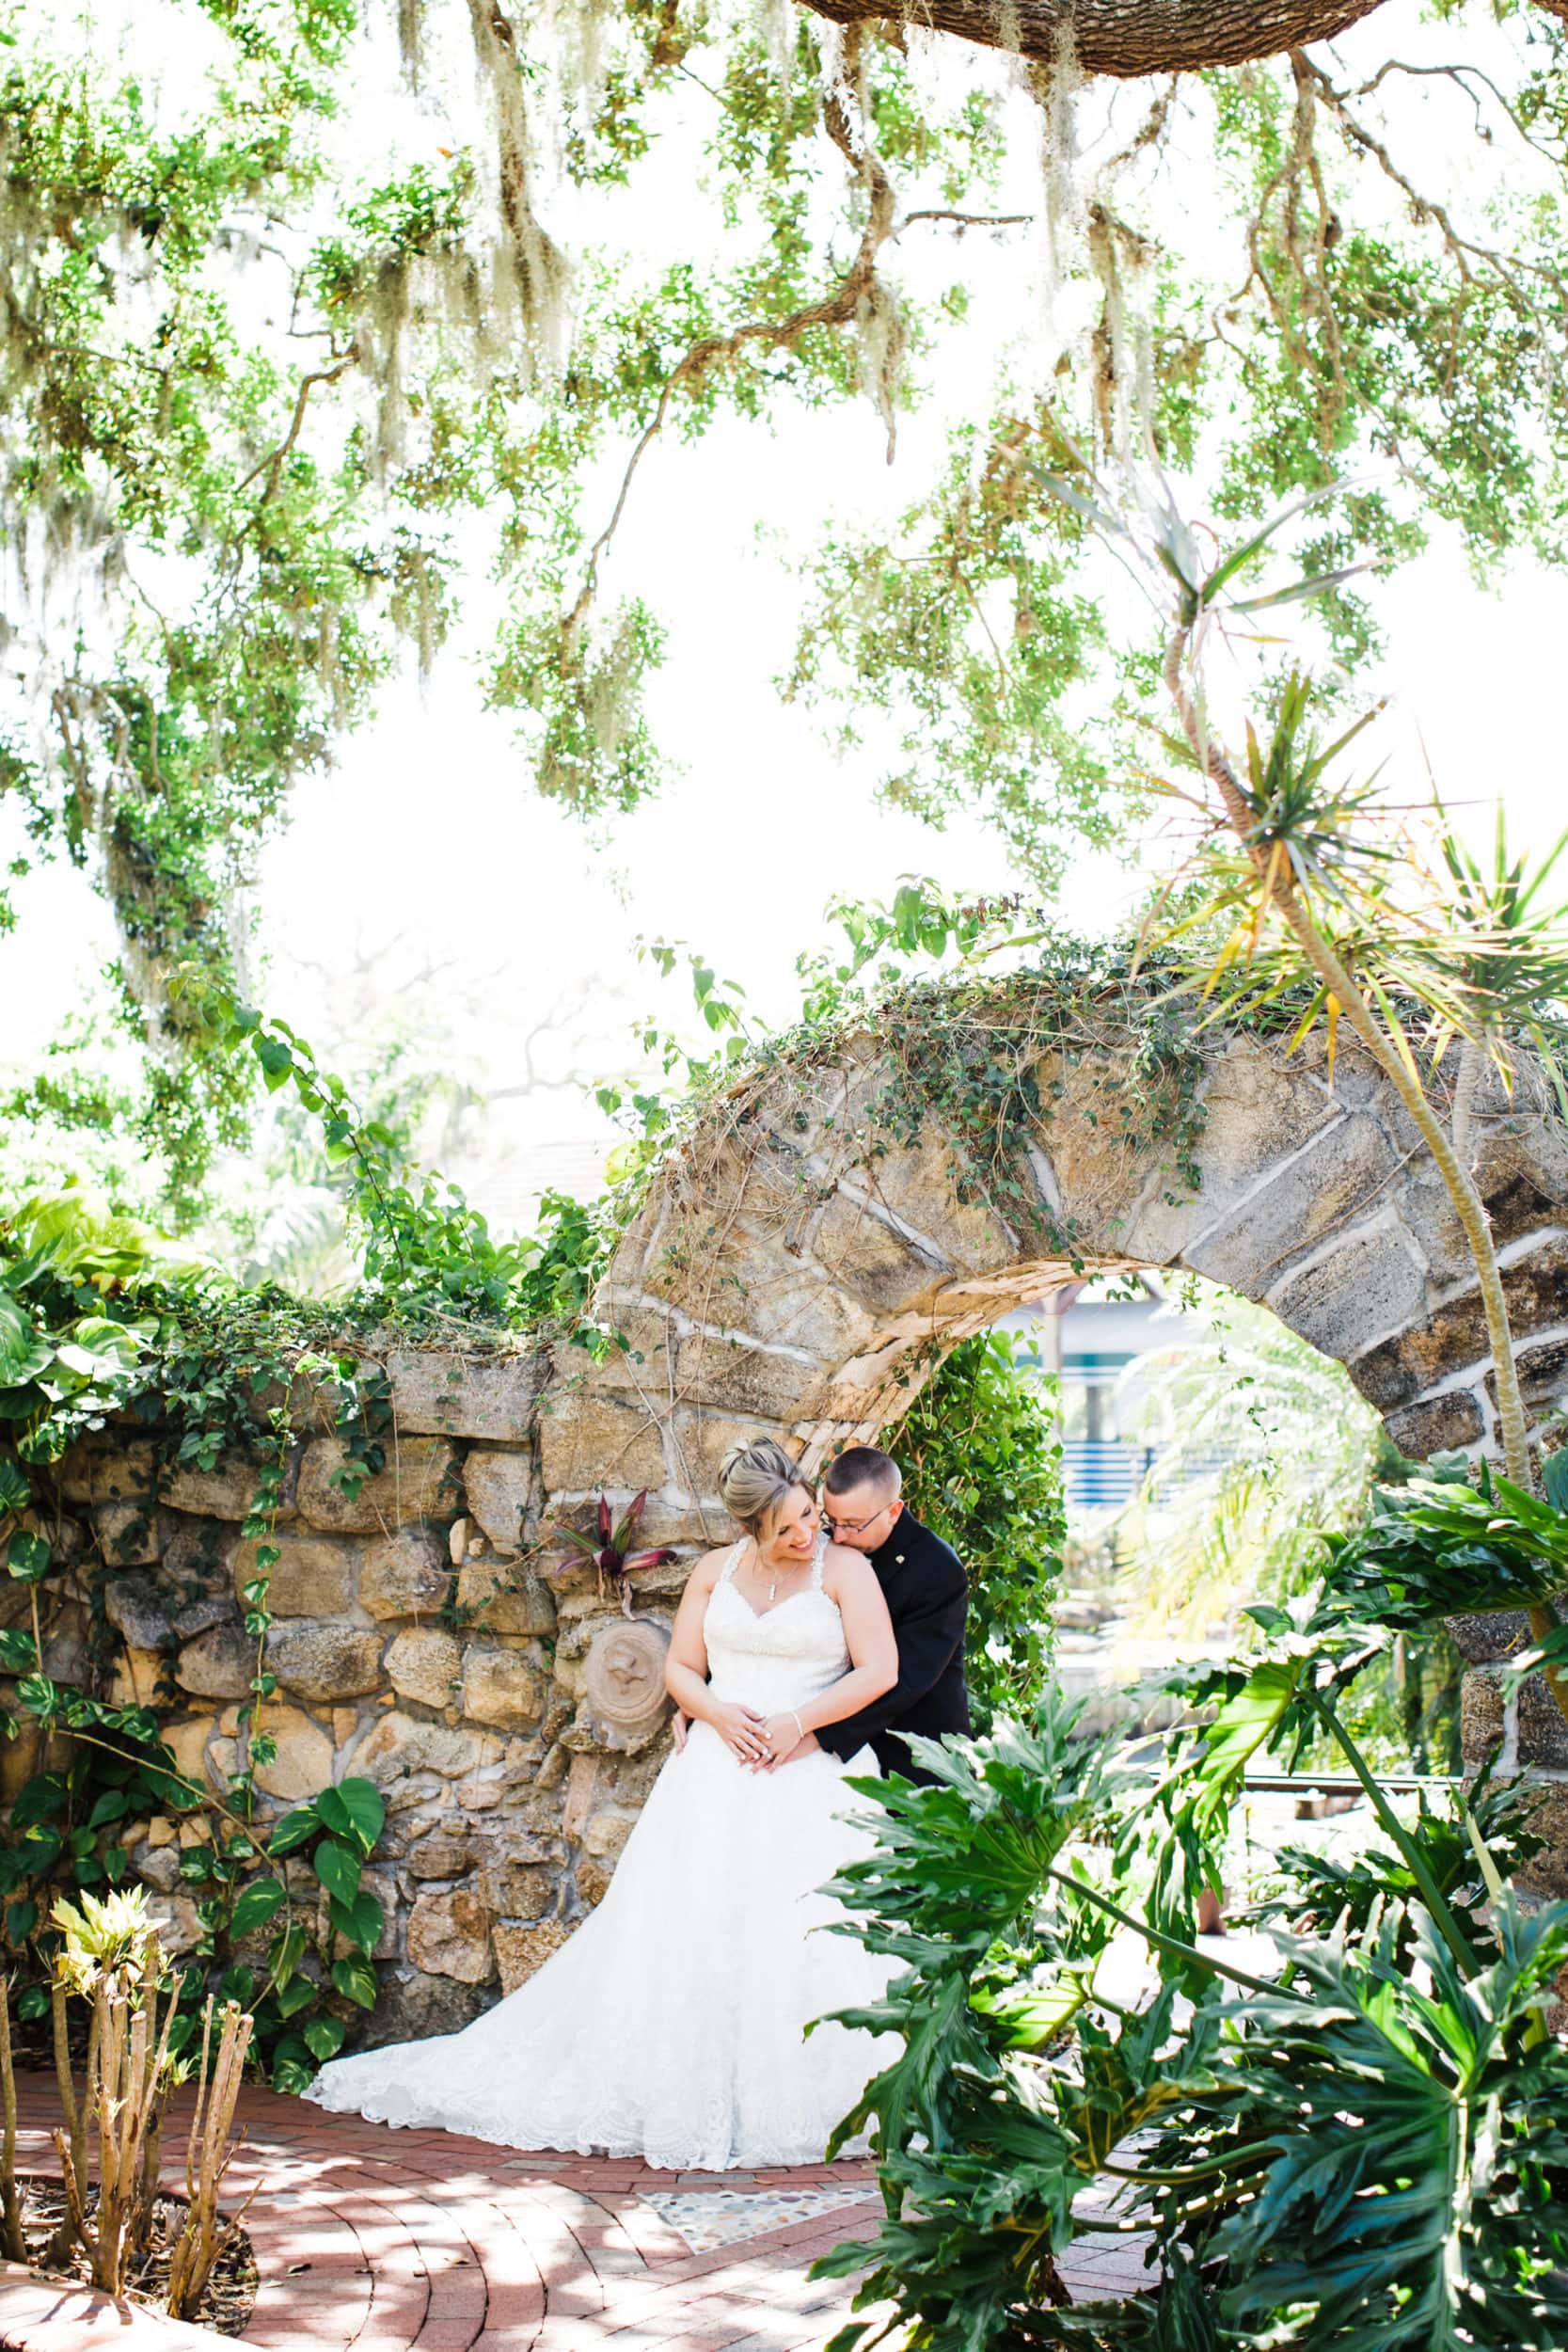 Groom hugging bride from behind in front of stone wall arch and walkway with lush green trees